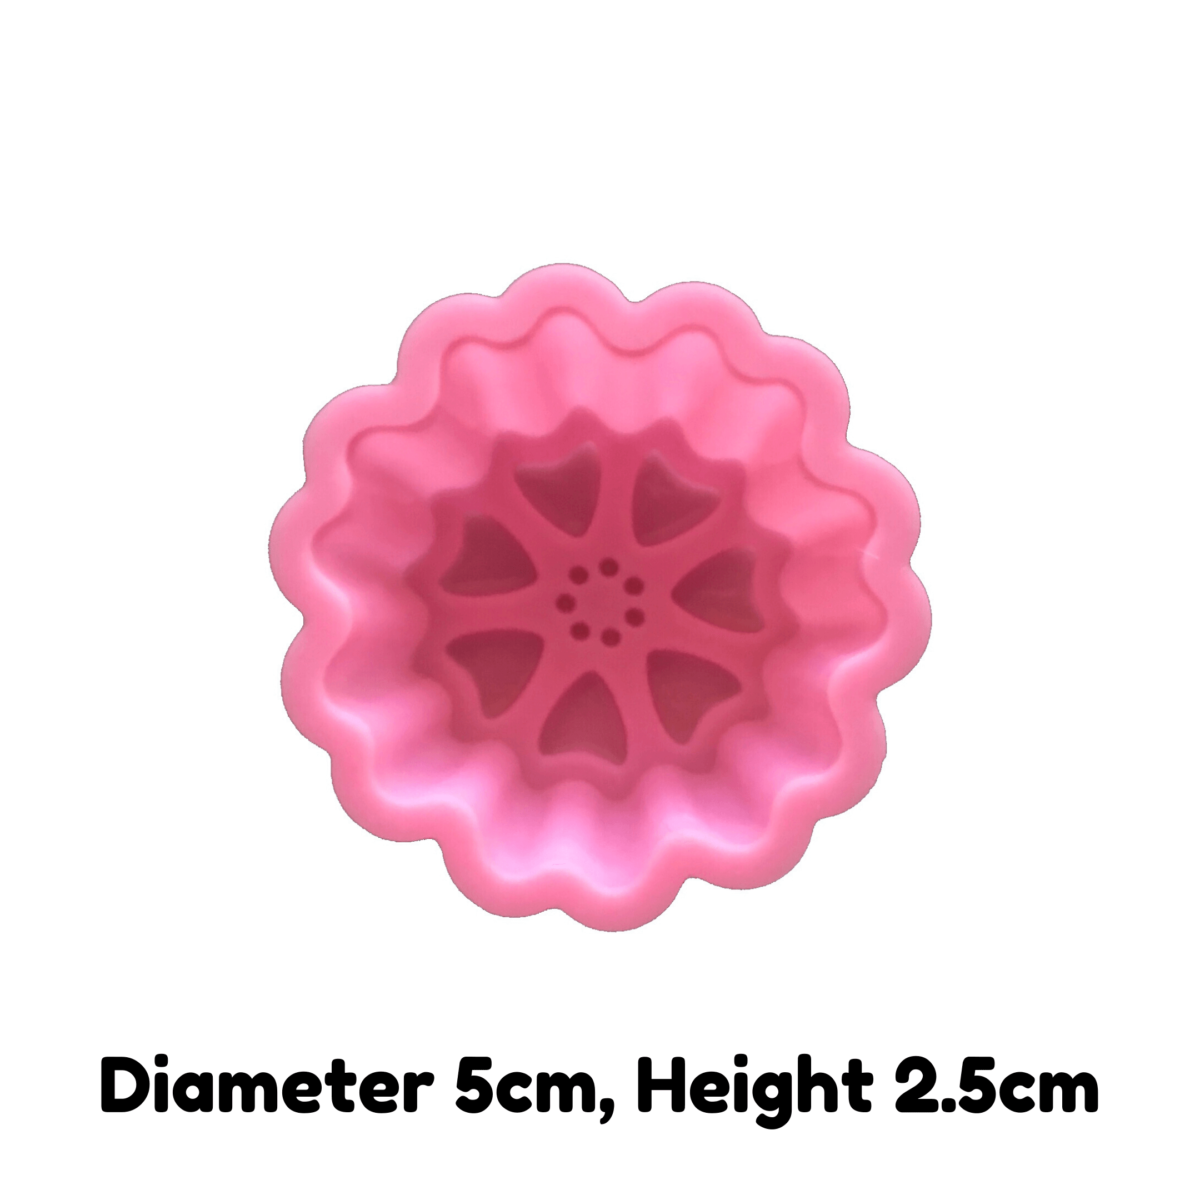 written dimensions of 5cm pink heart blossom single cavity silicone mould